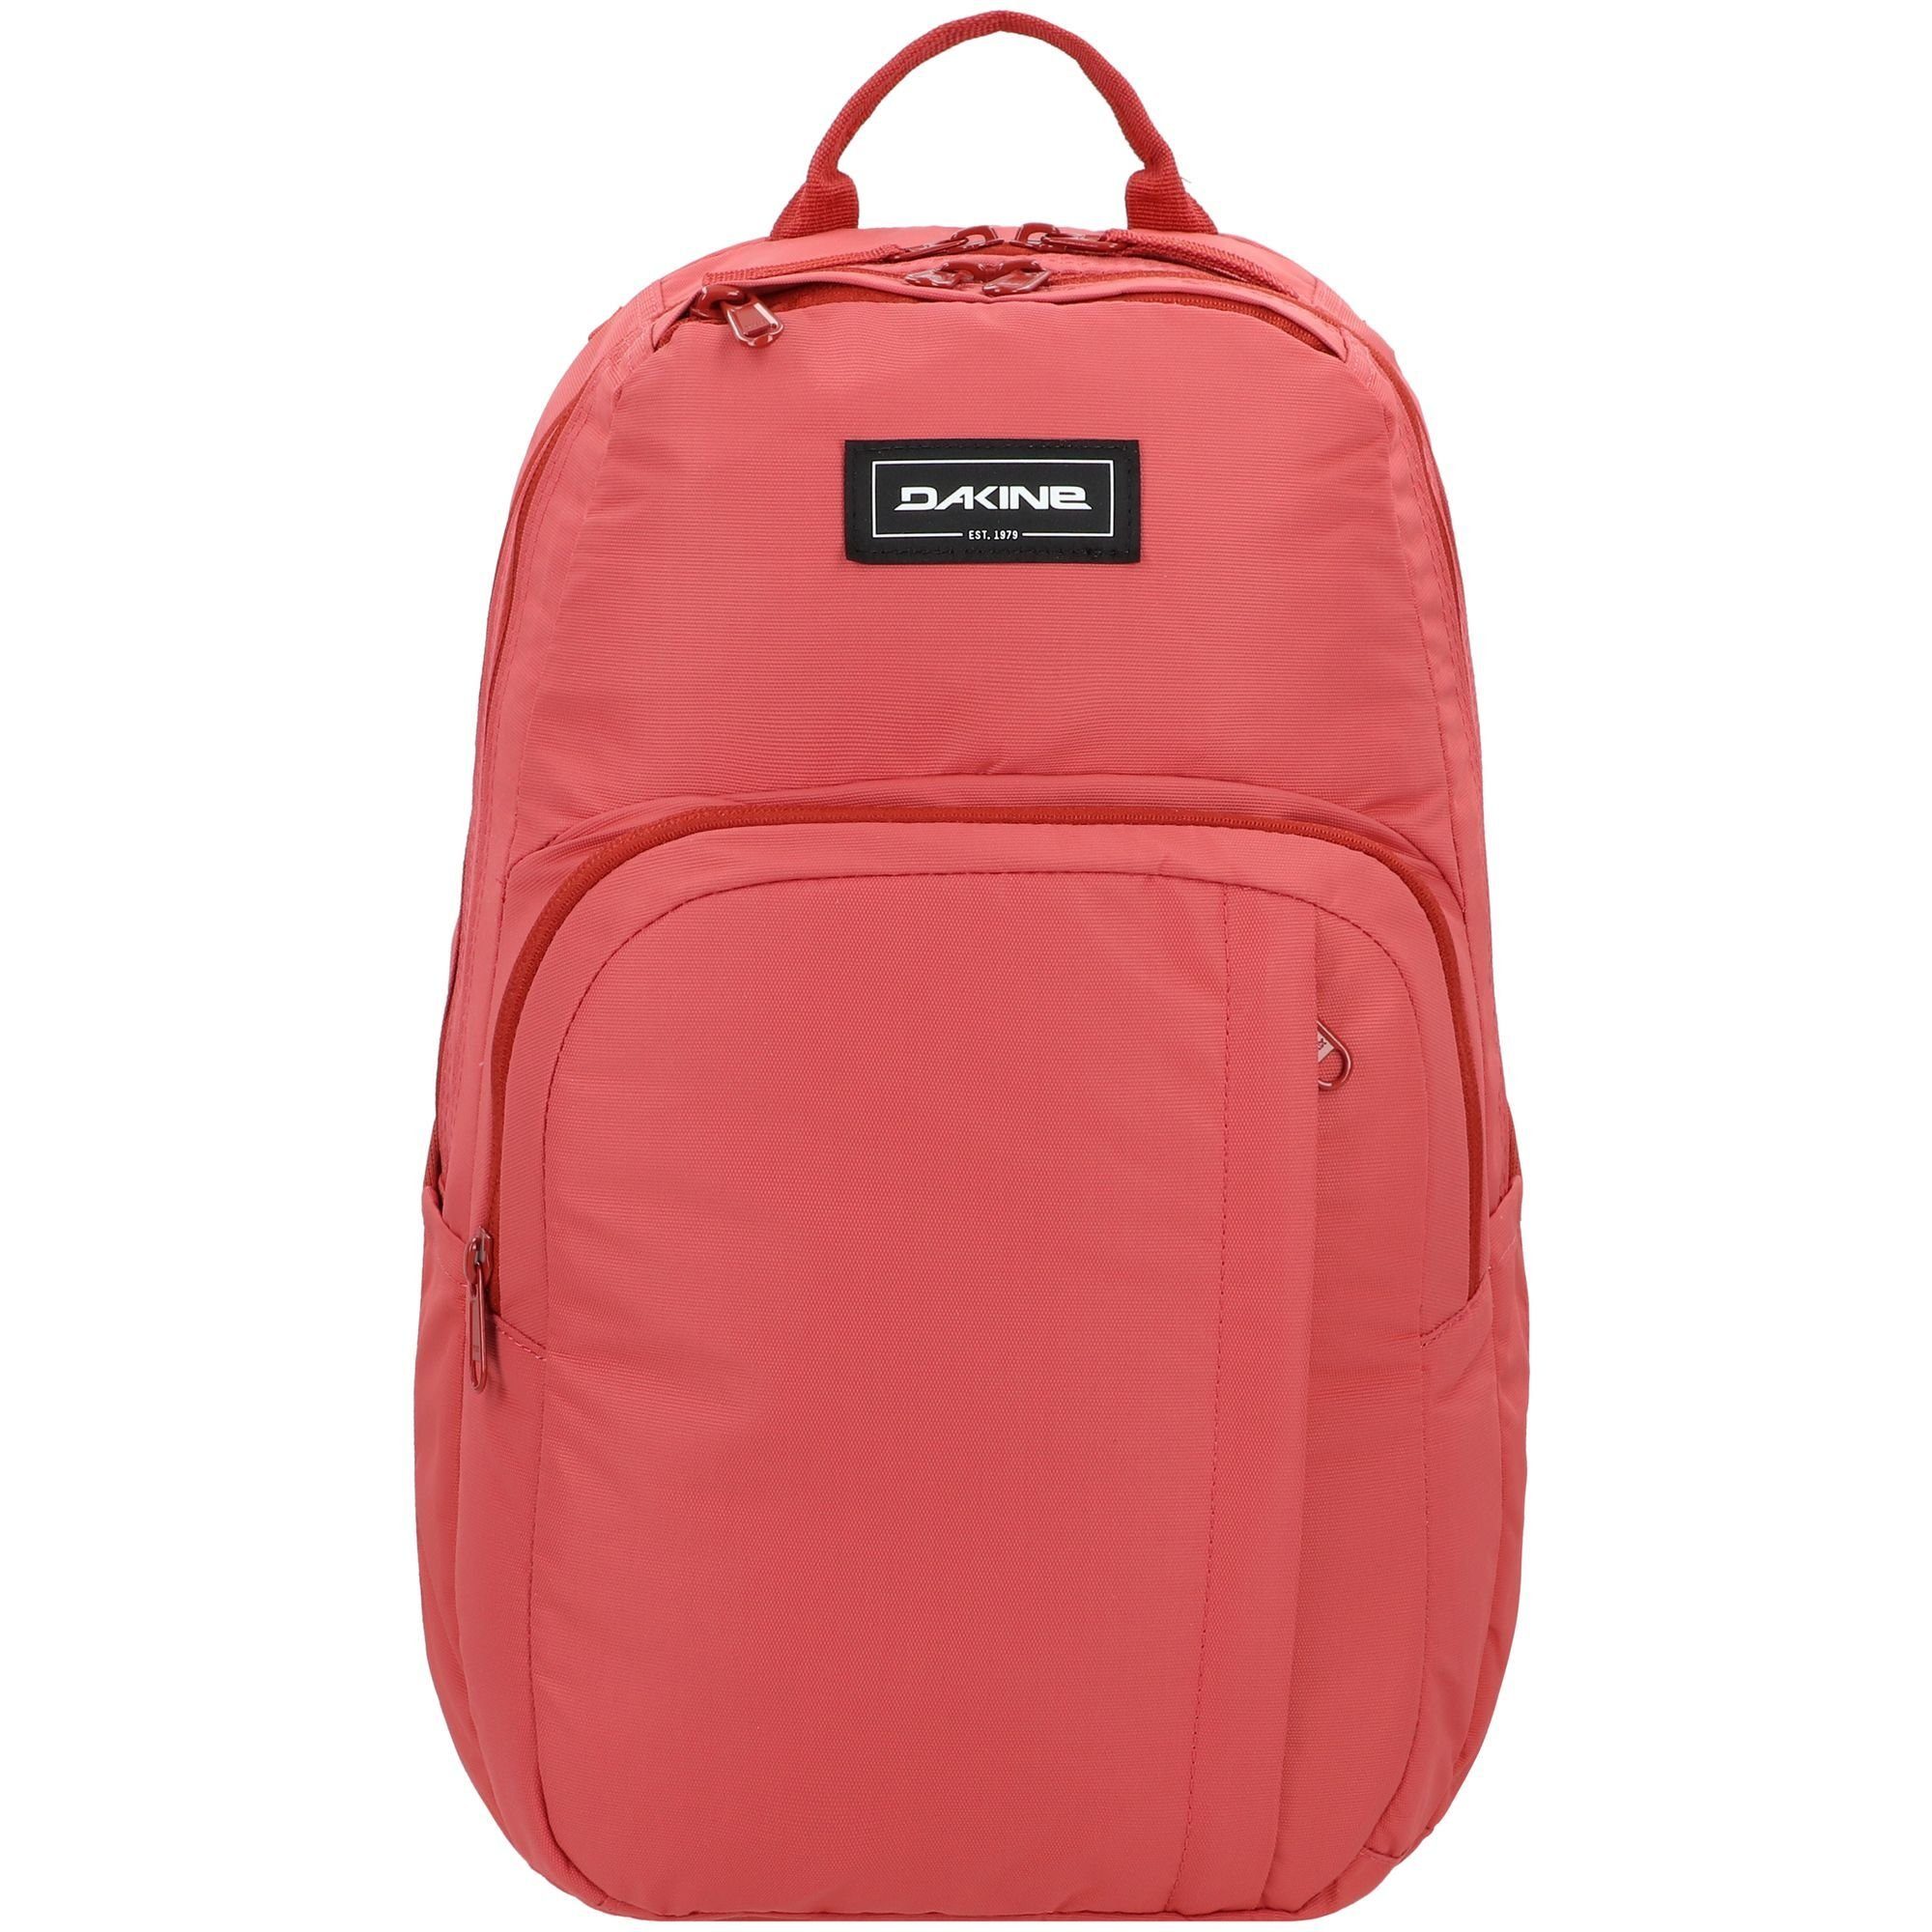 Daypack Dakine Polyester red mineral CAMPUS,